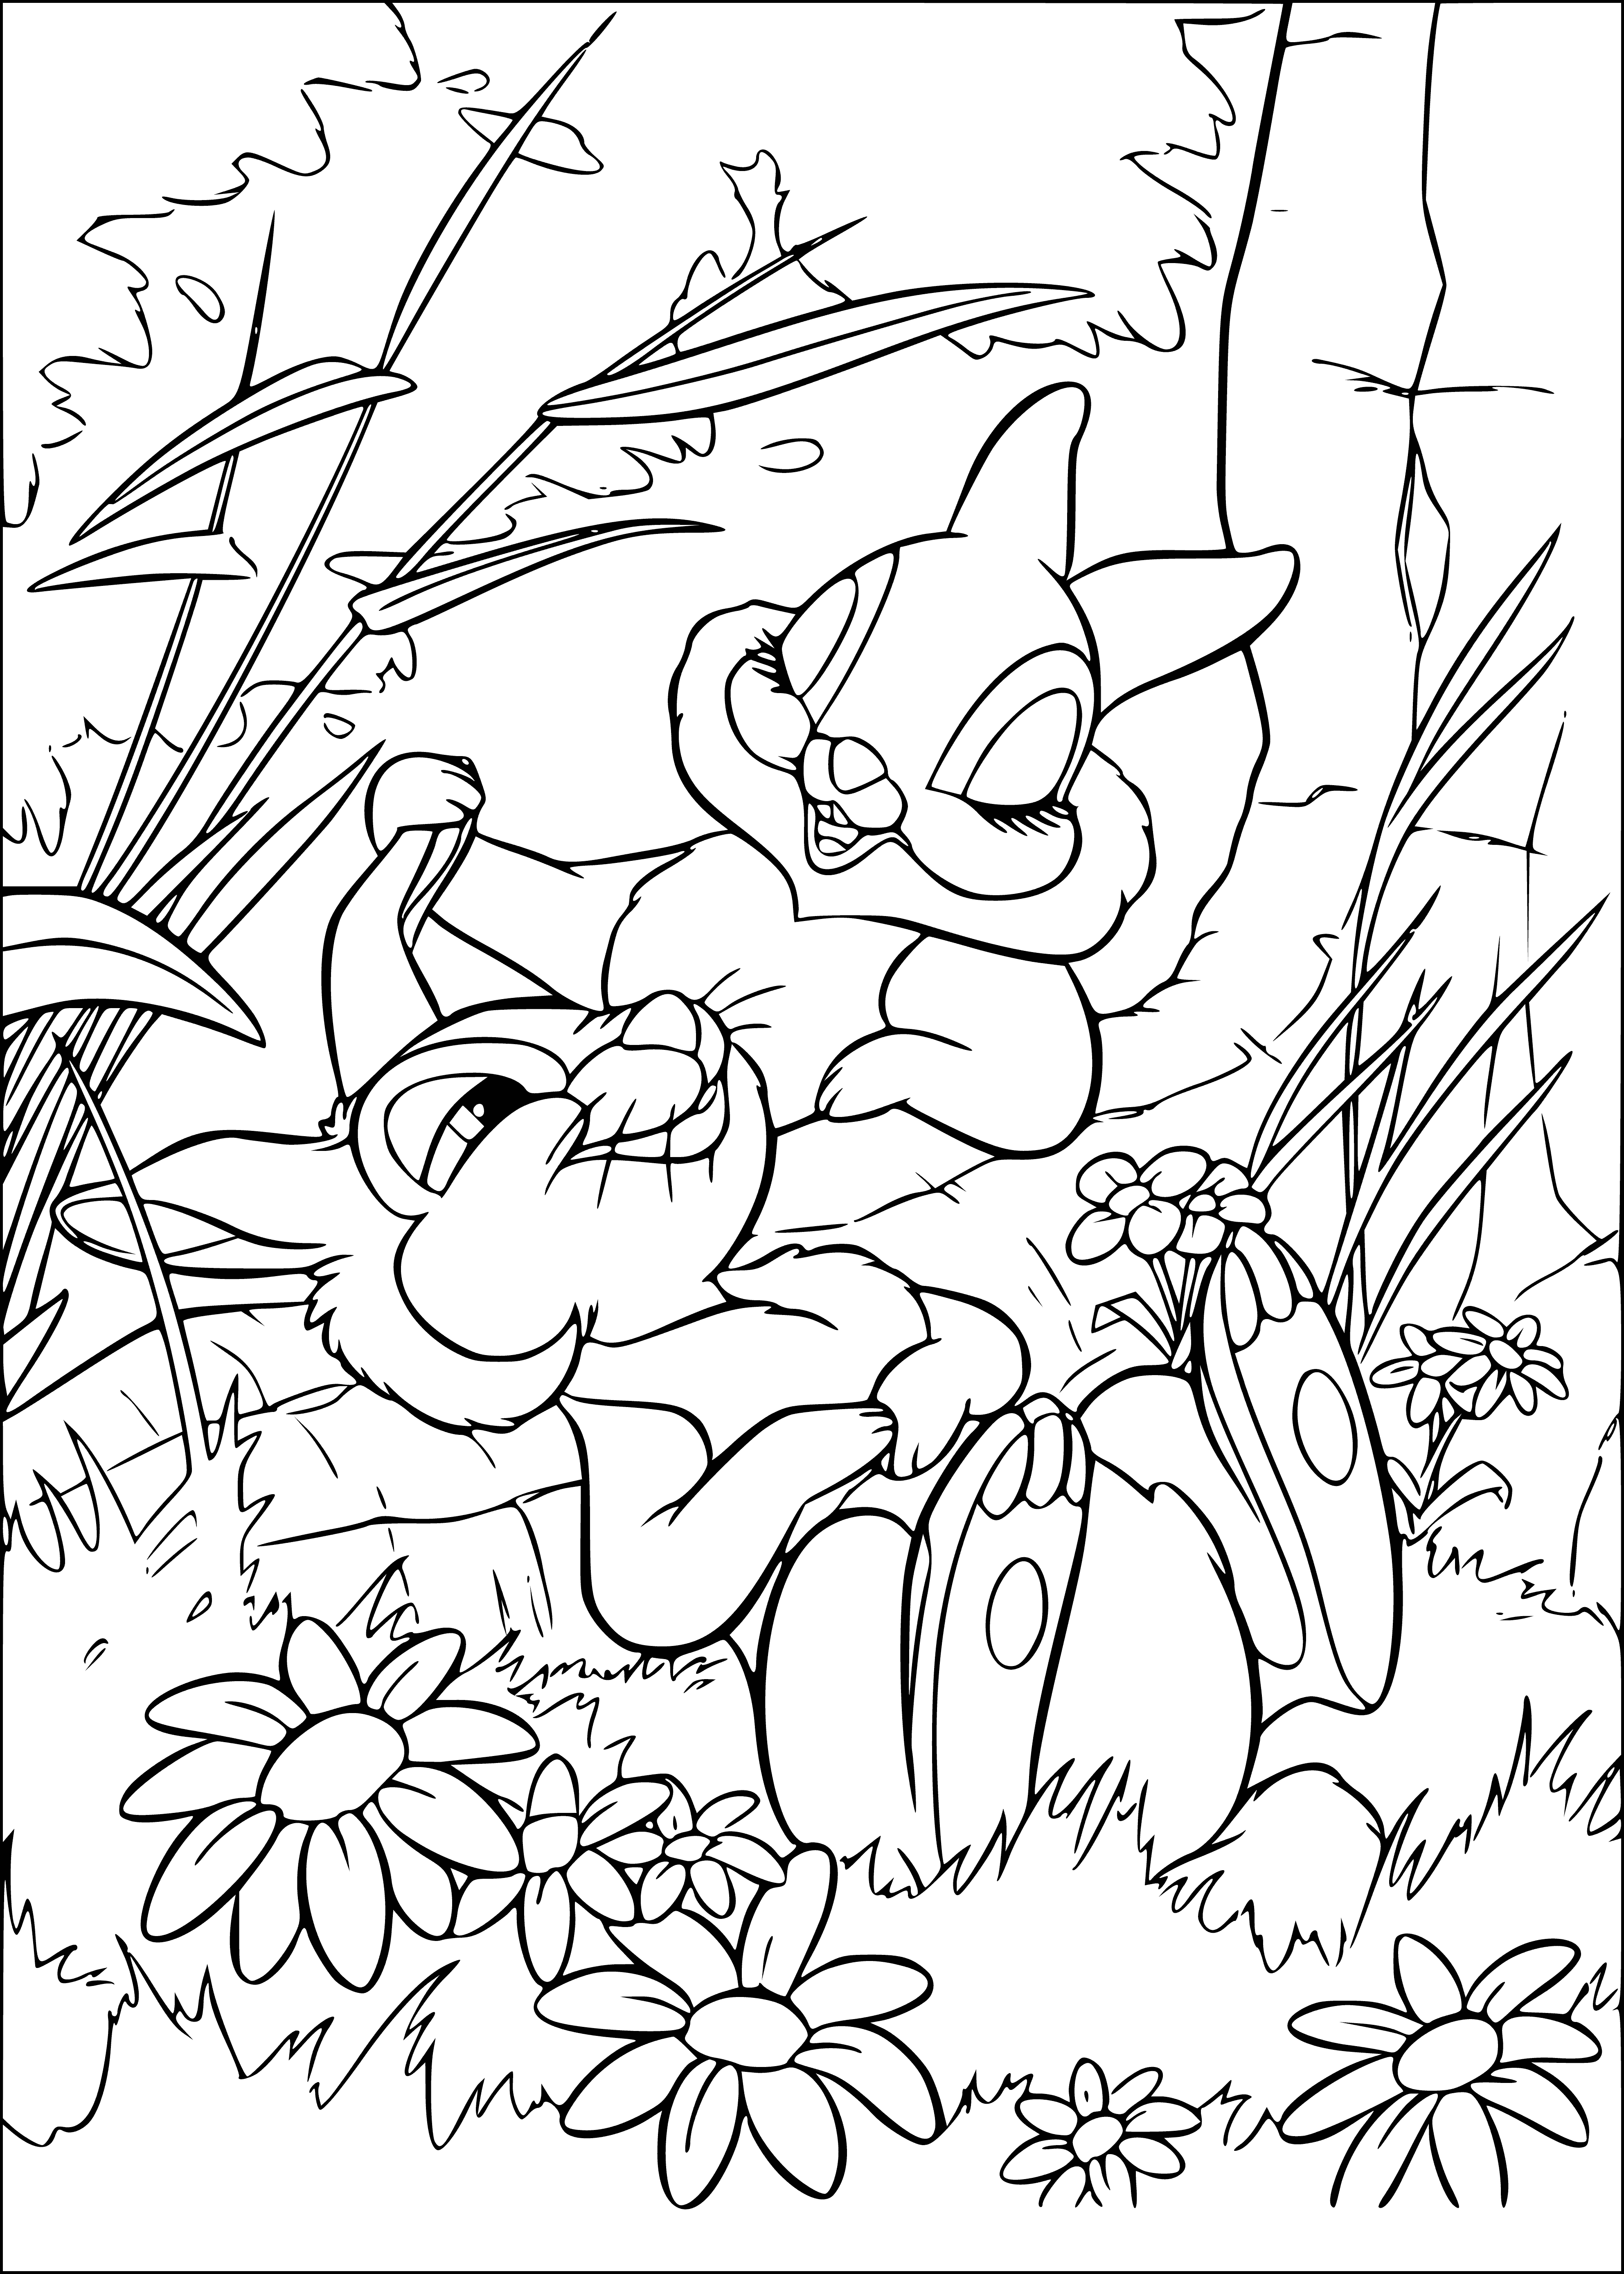 coloring page: Two animals look postured for adventure: a hare ready to run, a Bambi curious to pursue.